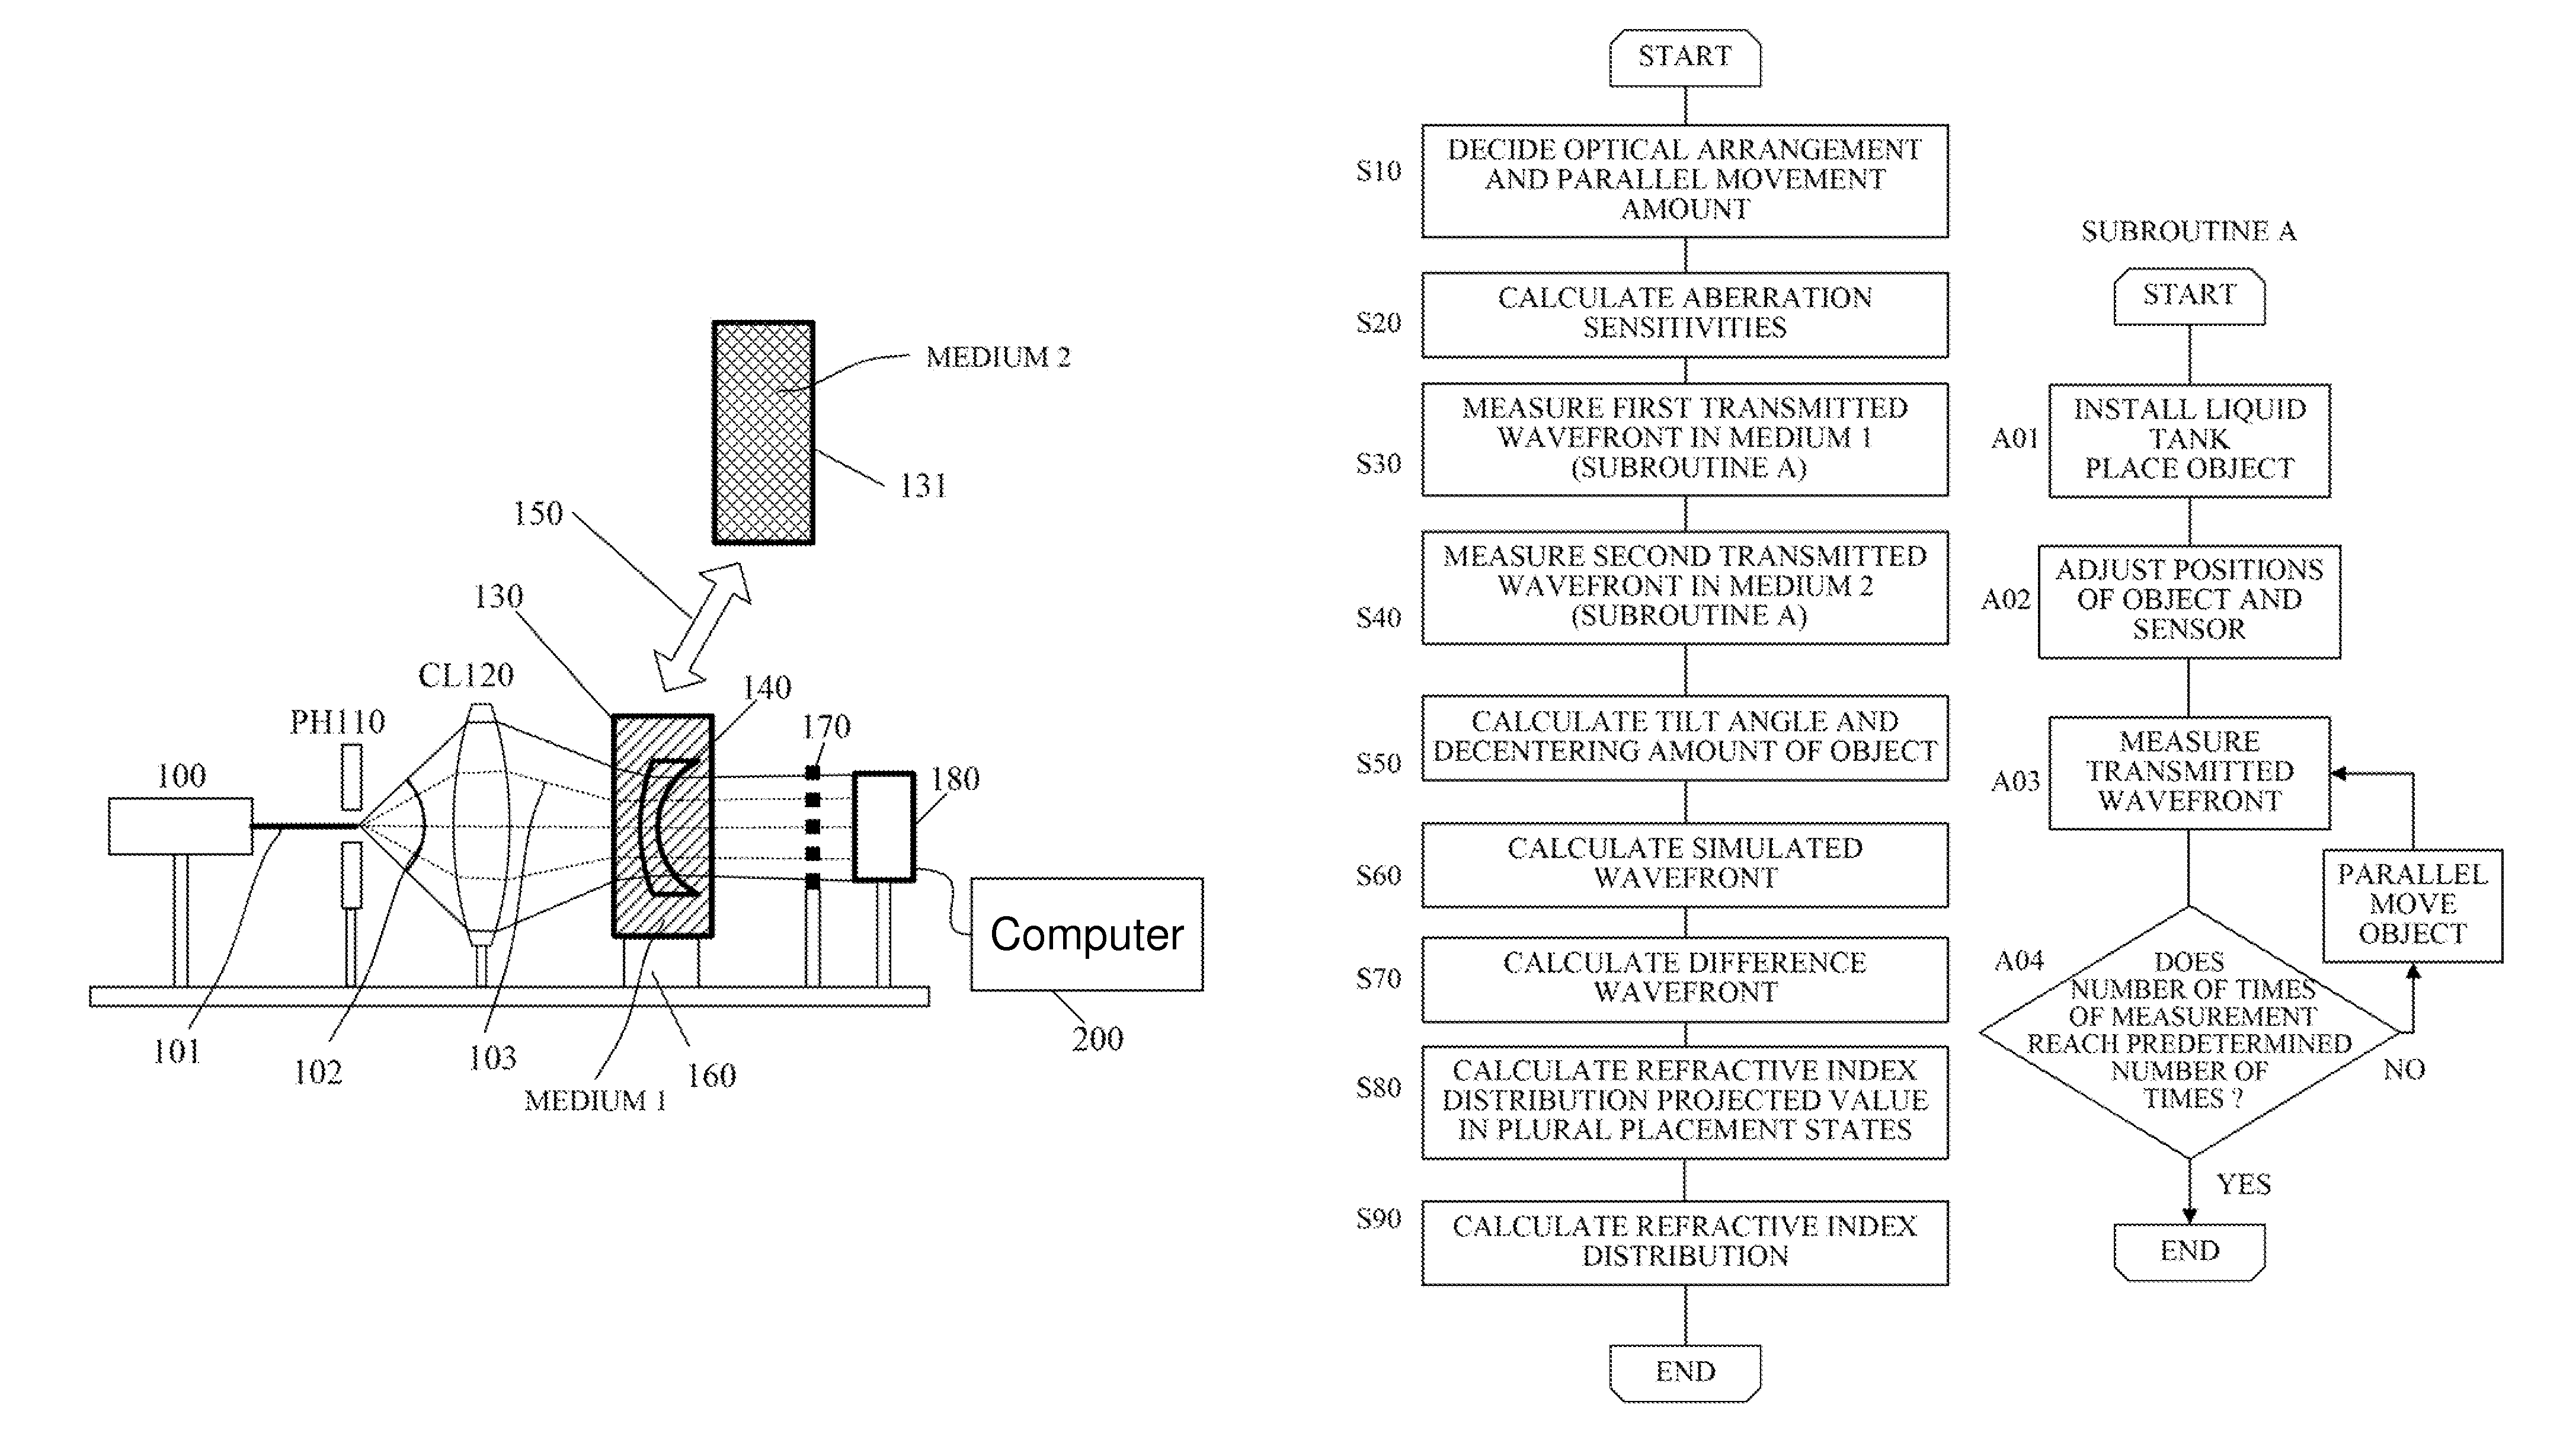 Refractive index distribution measuring method and apparatus, and method of producing optical element thereof, that use multiple transmission wavefronts of a test object immersed in at least one medium having a different refractive index from that of the test object and multiple reference transmission wavefronts of a reference object having known shape and refractive index distribution